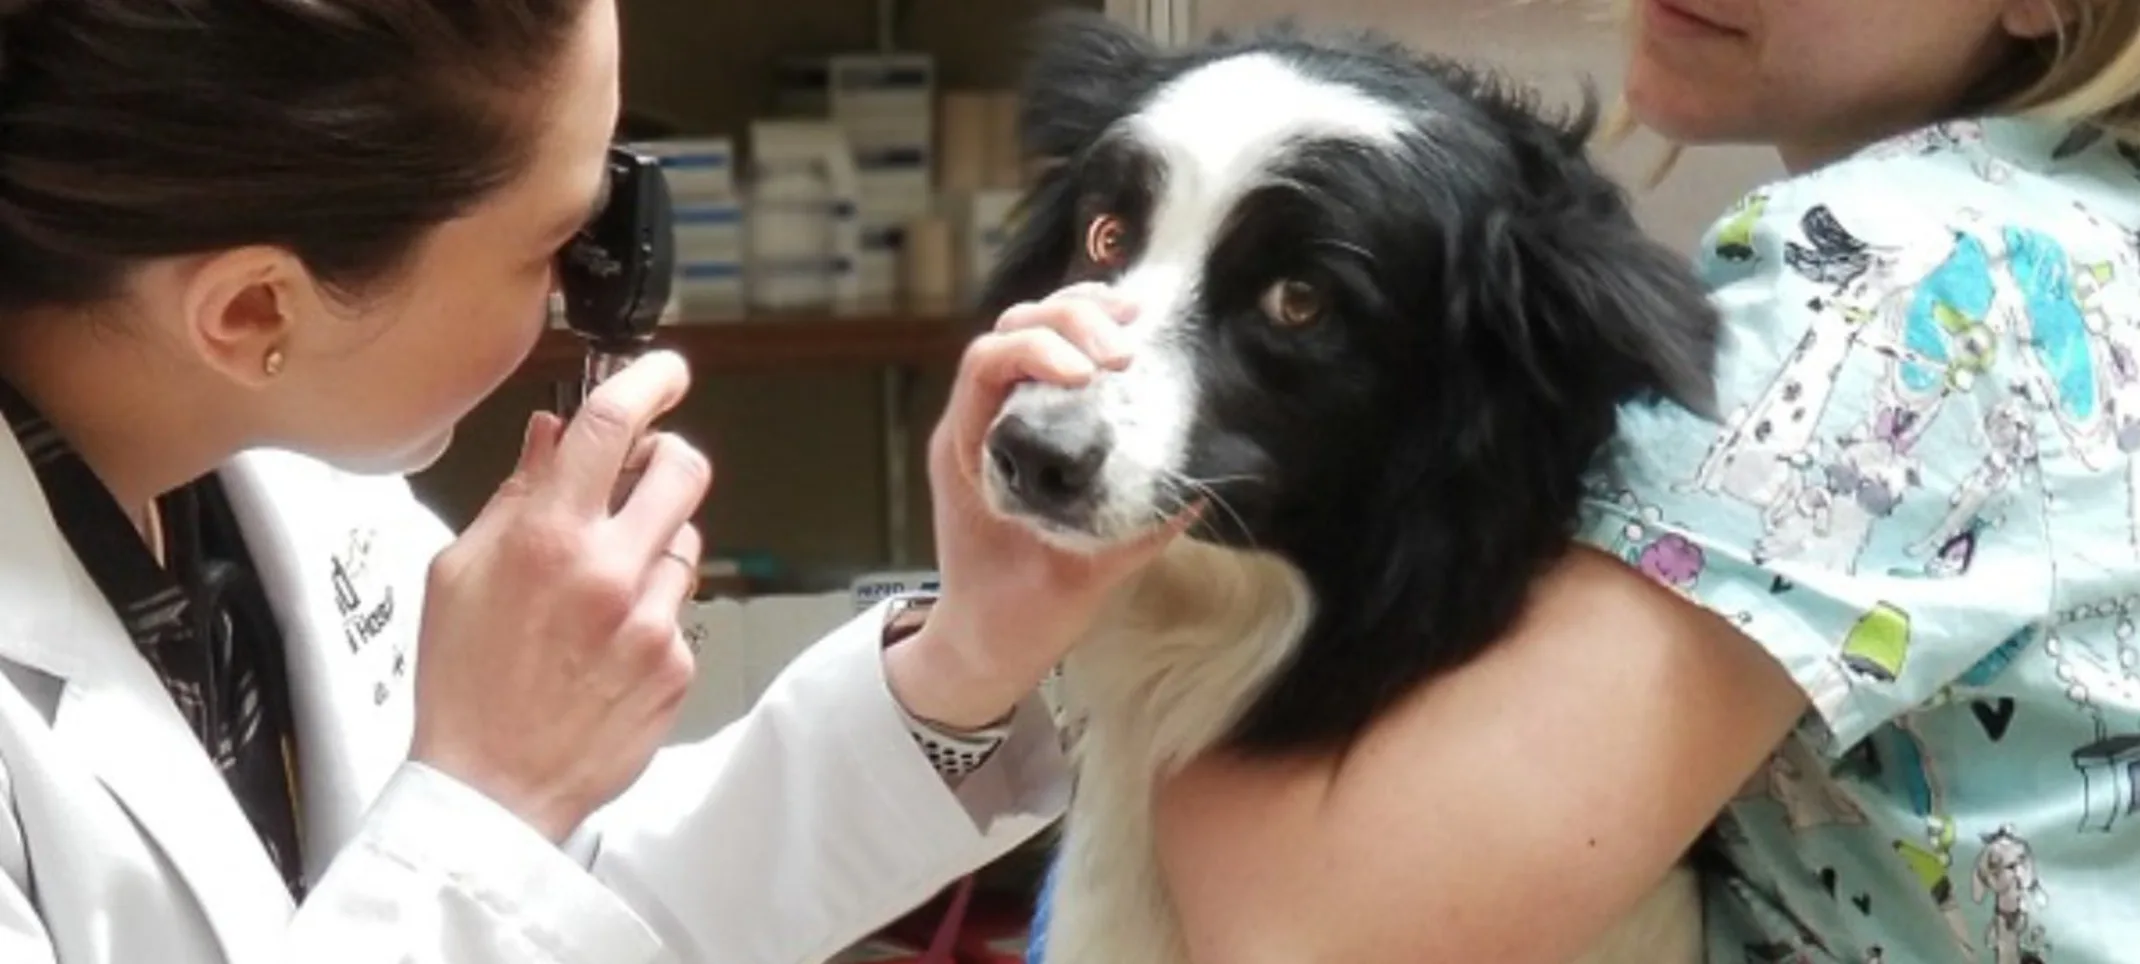 Doctor looking at a black and white dog's eyes and a staff member holding the dog